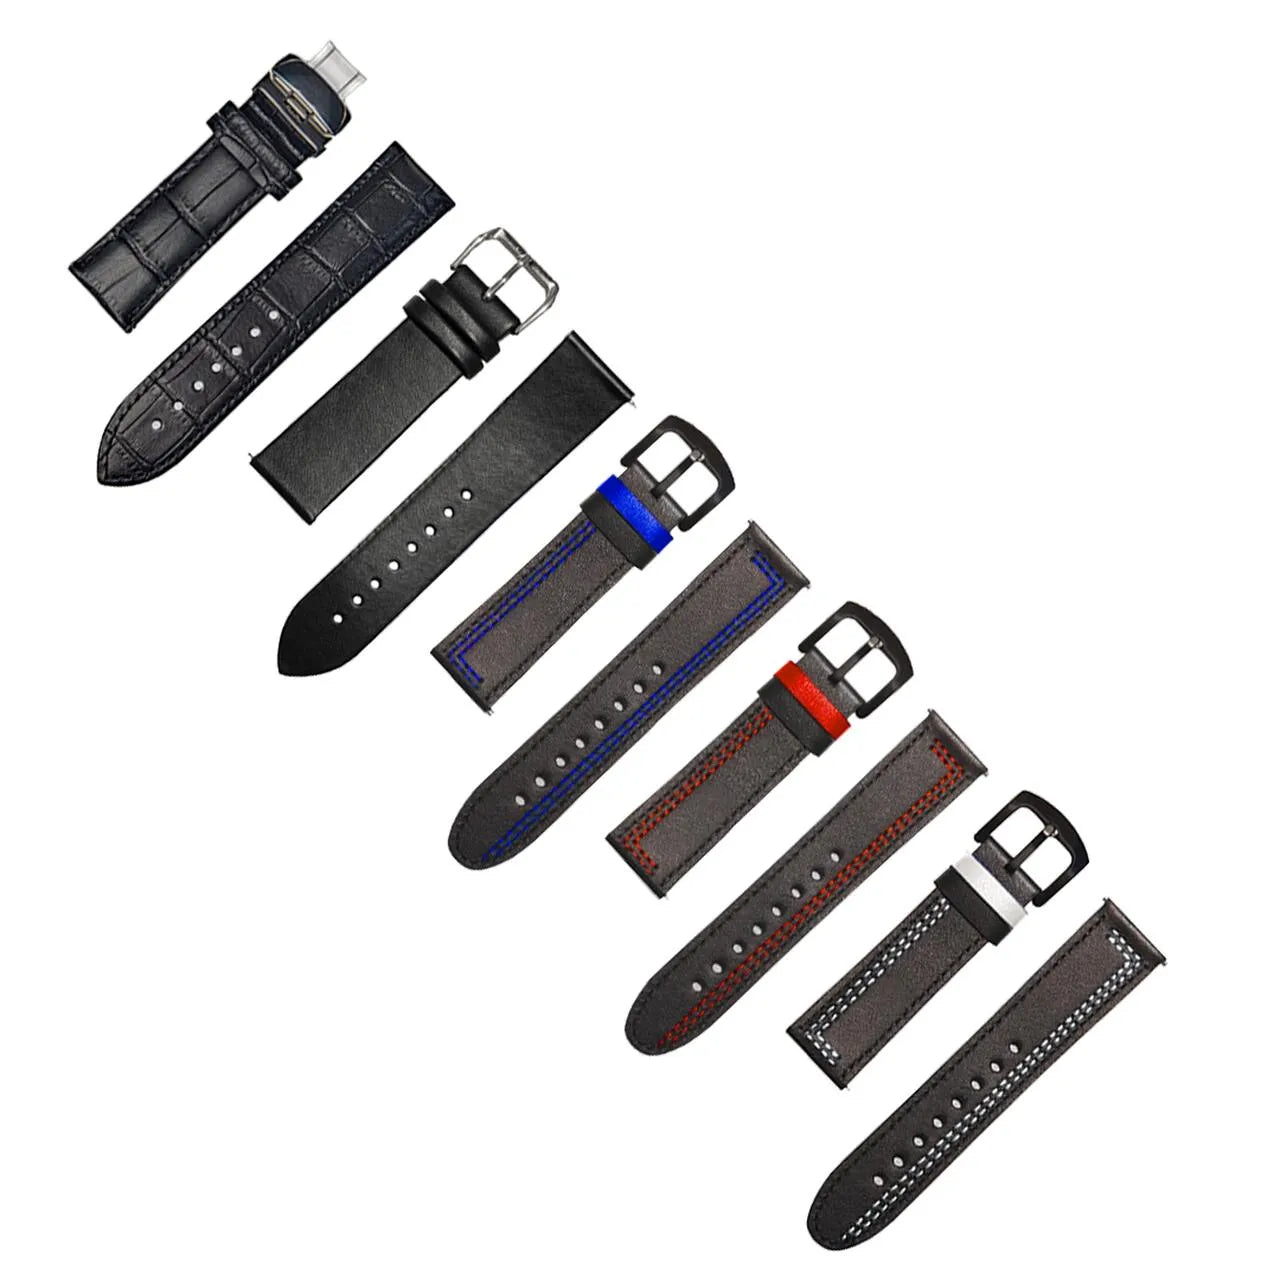 Enhance your look with our Black-Blue Leather Bracelet. Discover the innovative design of rim-inspired watches from a German startup. Perfect for motorheads, tuners, and auto aficionados.